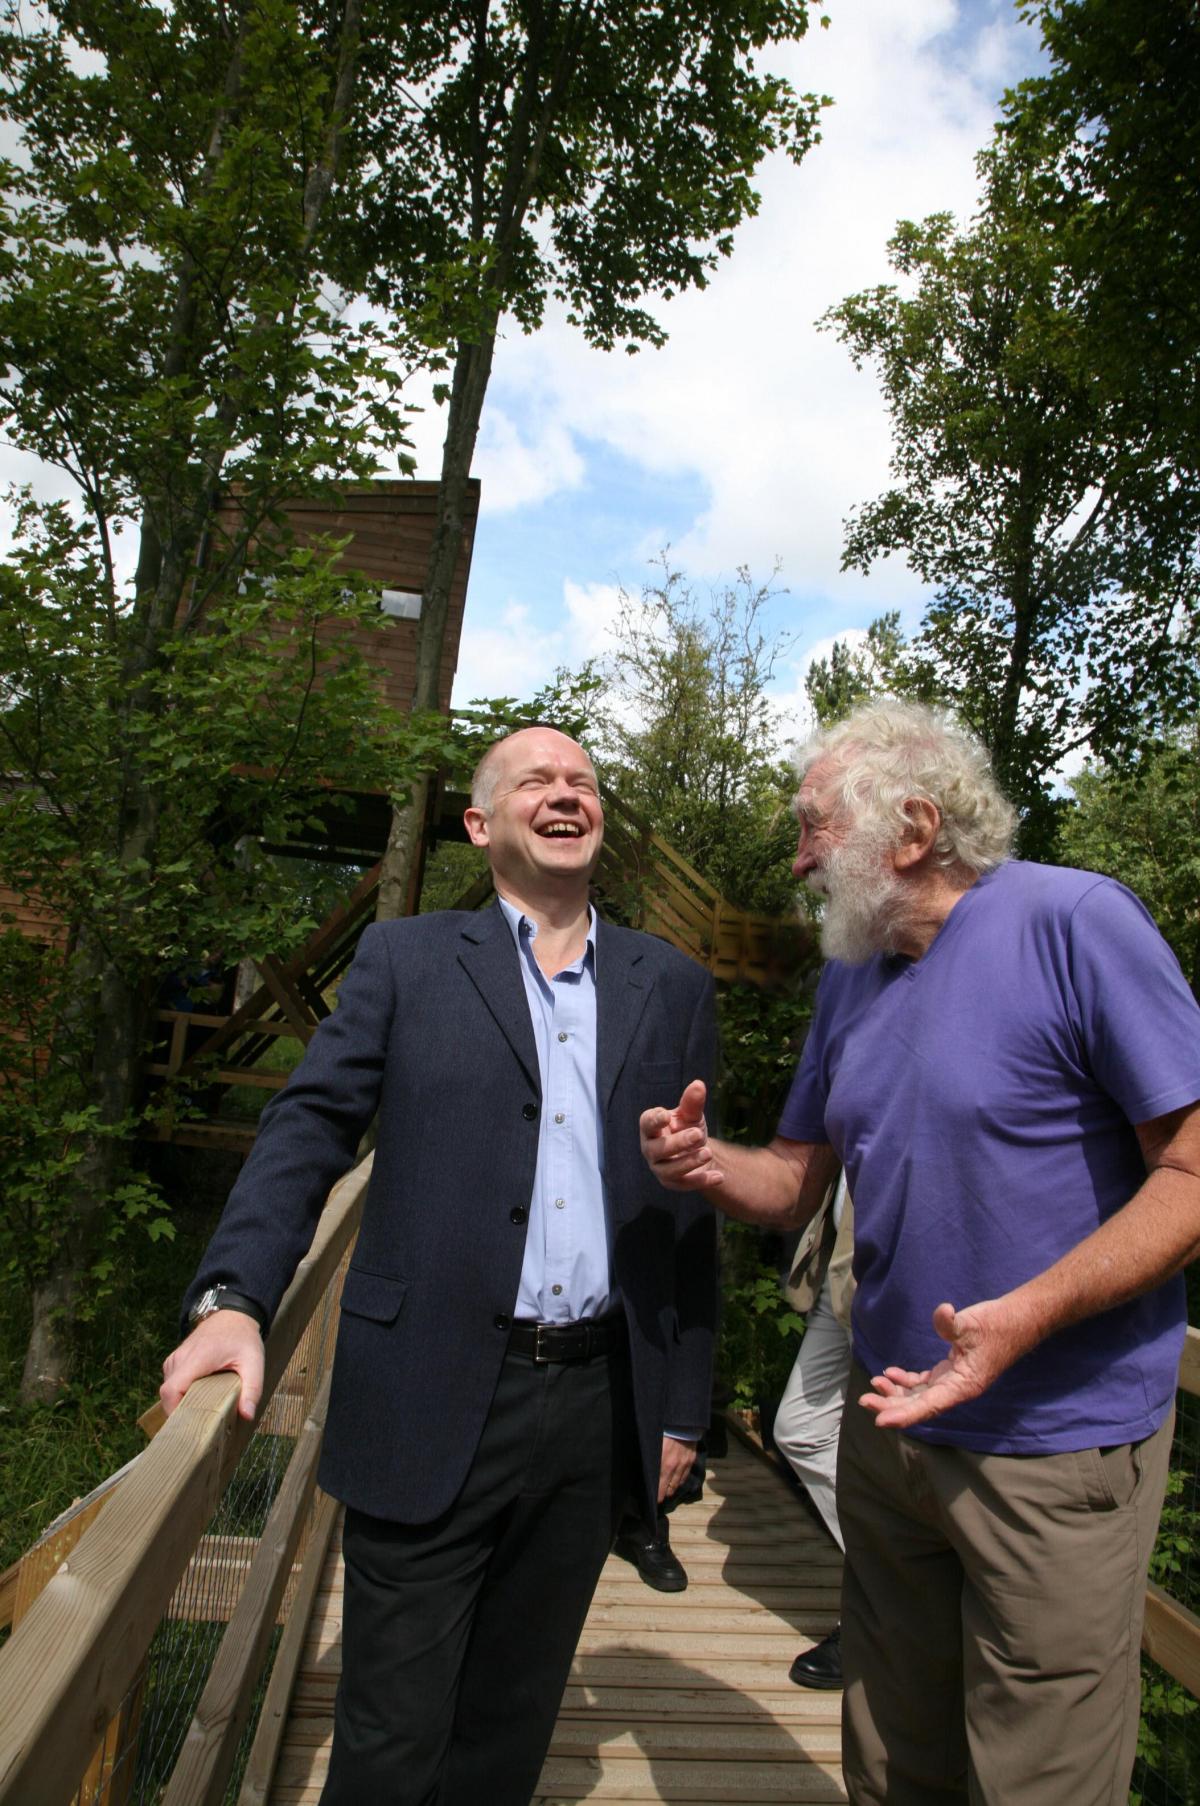 William Hague MP, left and Dr David Bellamy on their tour on open day at Foxglove Covert Nature reserve at Catterick in 2011